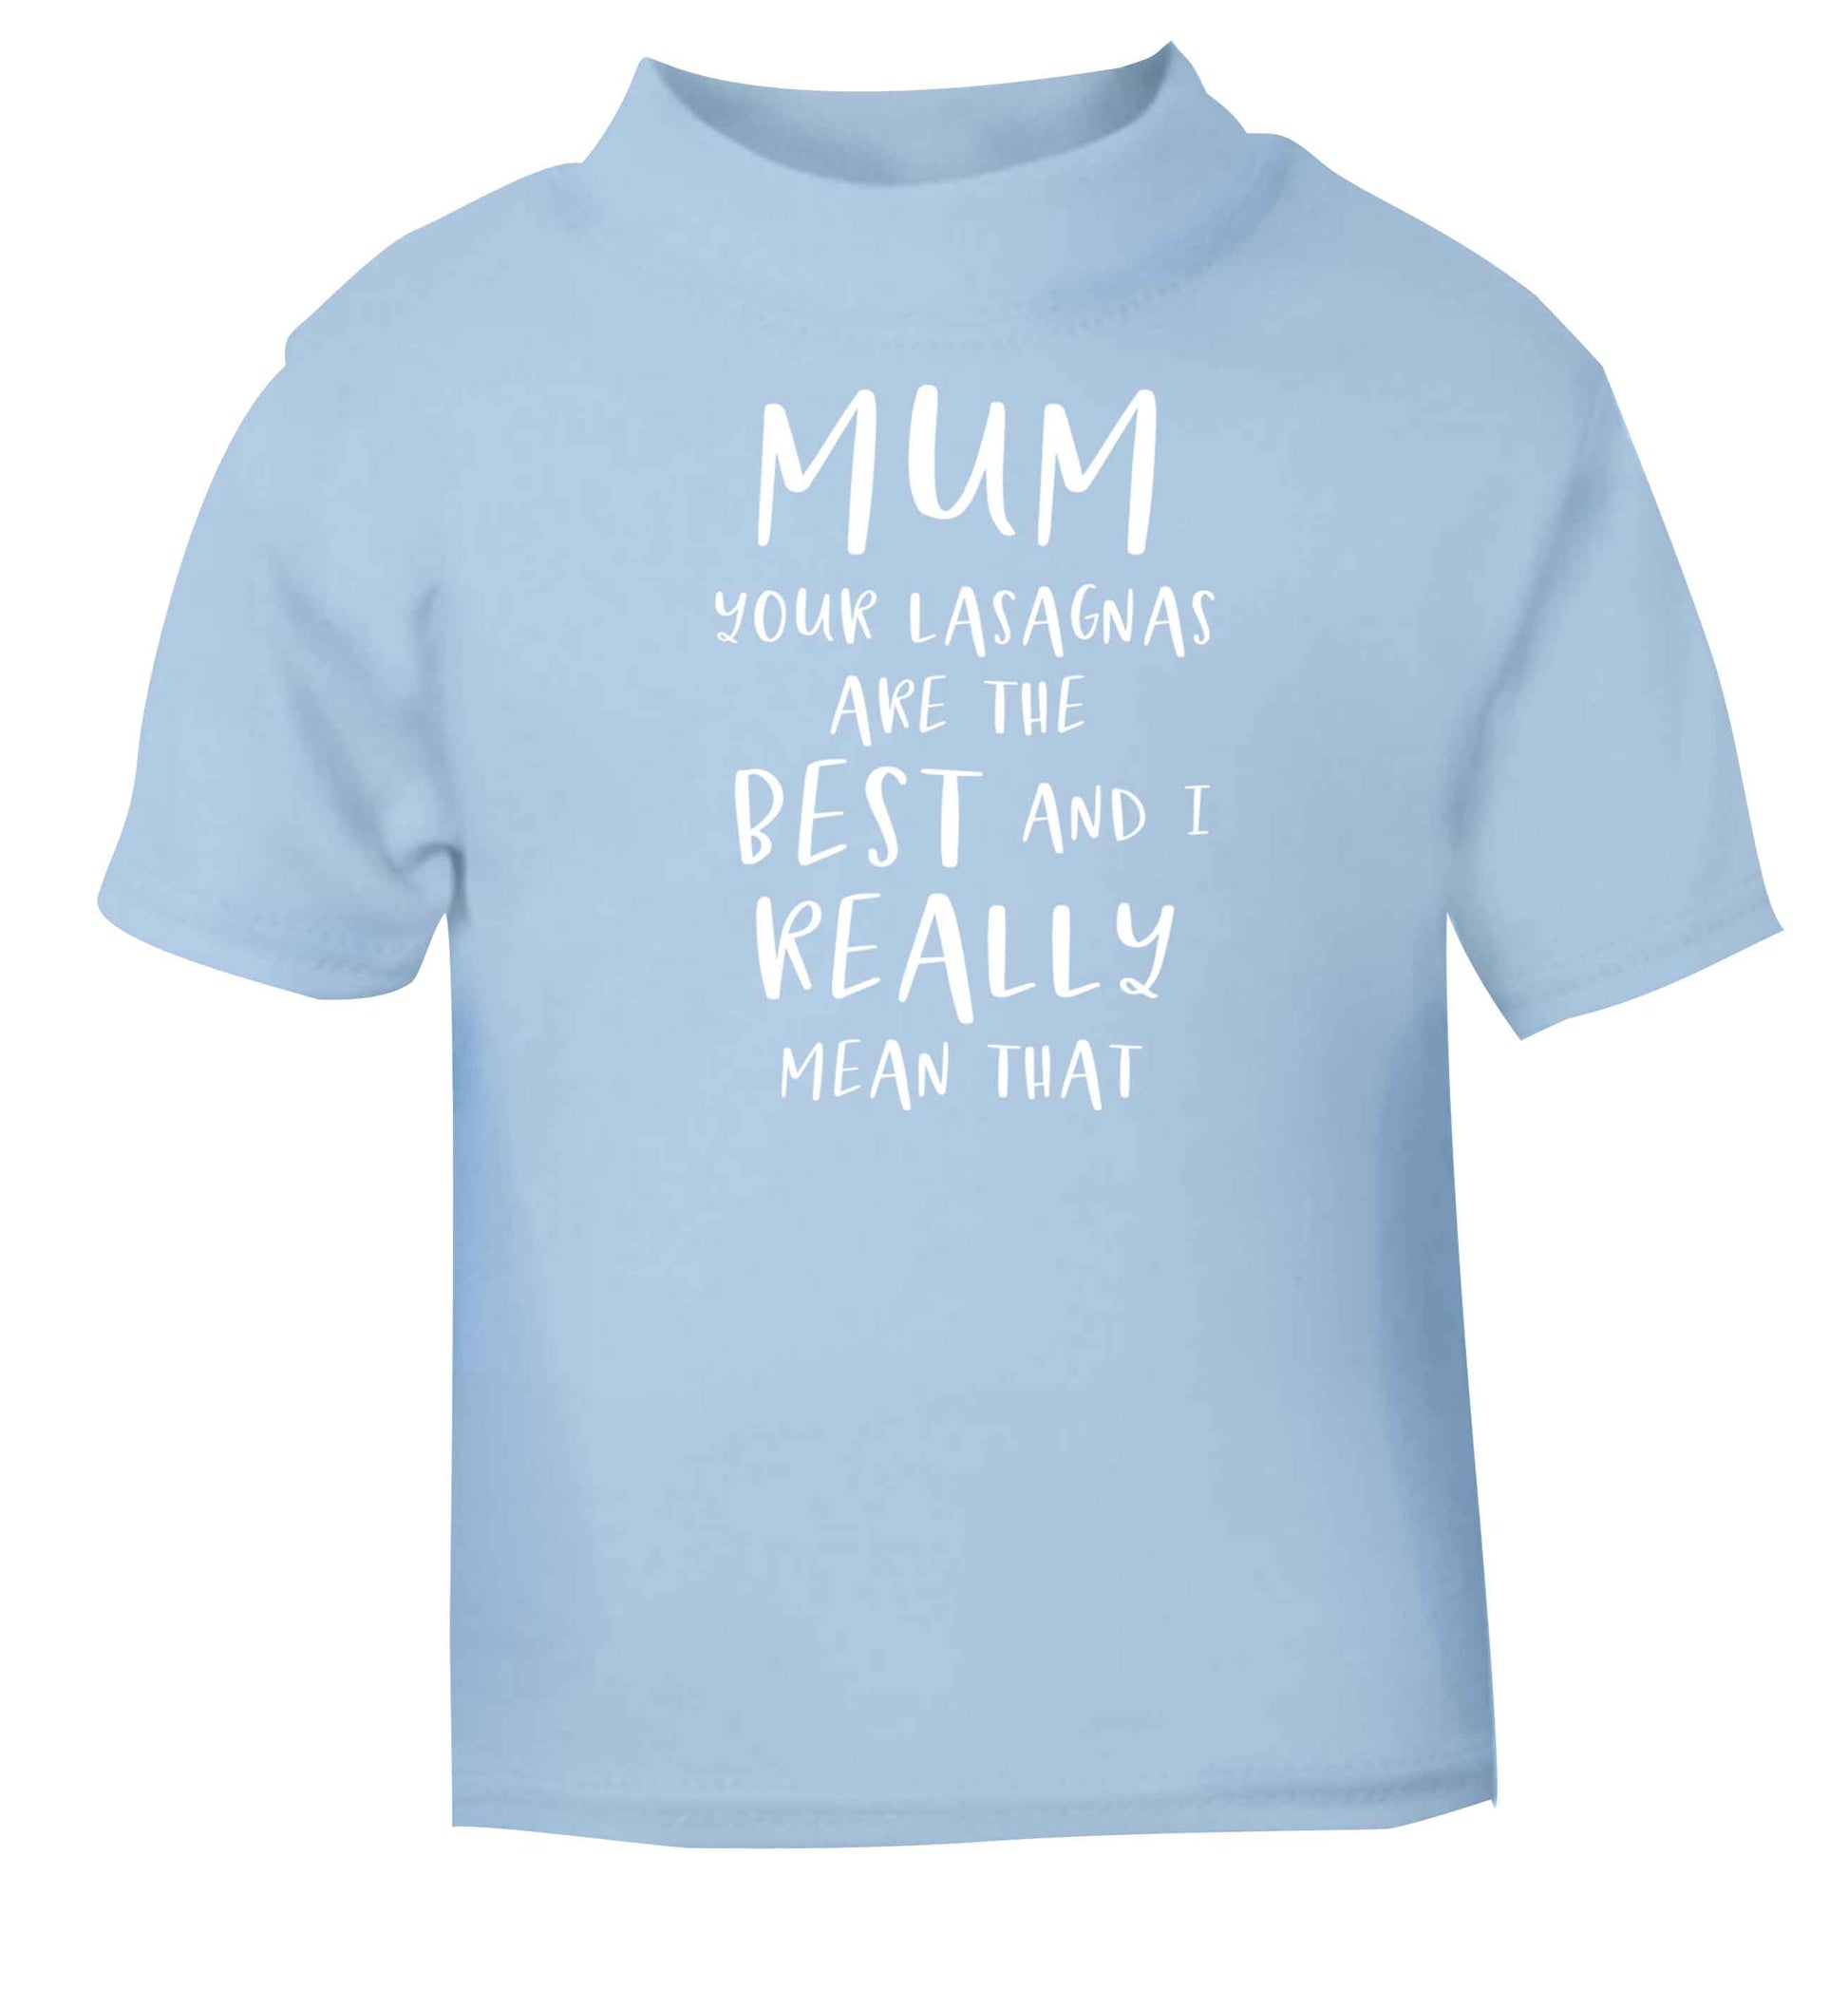 Funny gifts for your mum on mother's dayor her birthday! Mum your lasagnas are the best and I really mean that light blue baby toddler Tshirt 2 Years